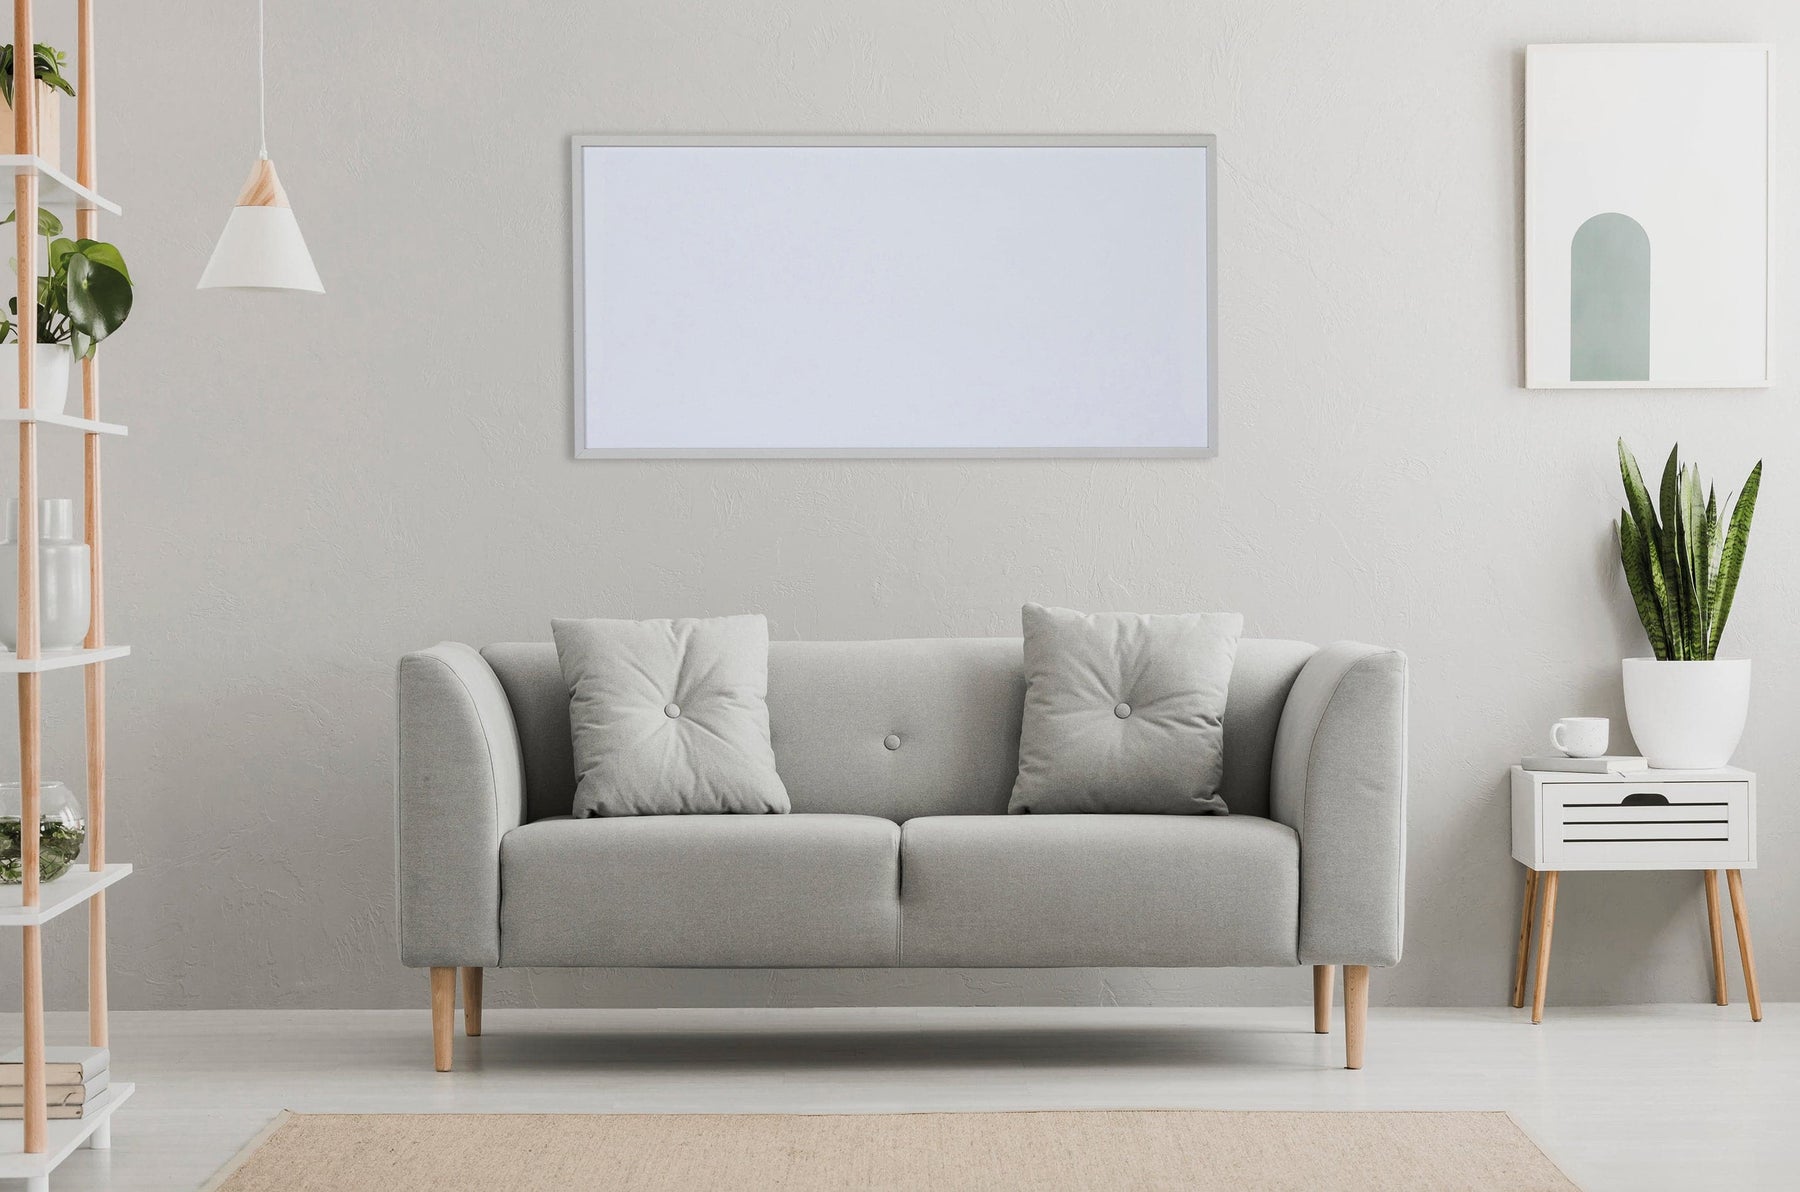 600W Infrared Heating Panel - Grade A